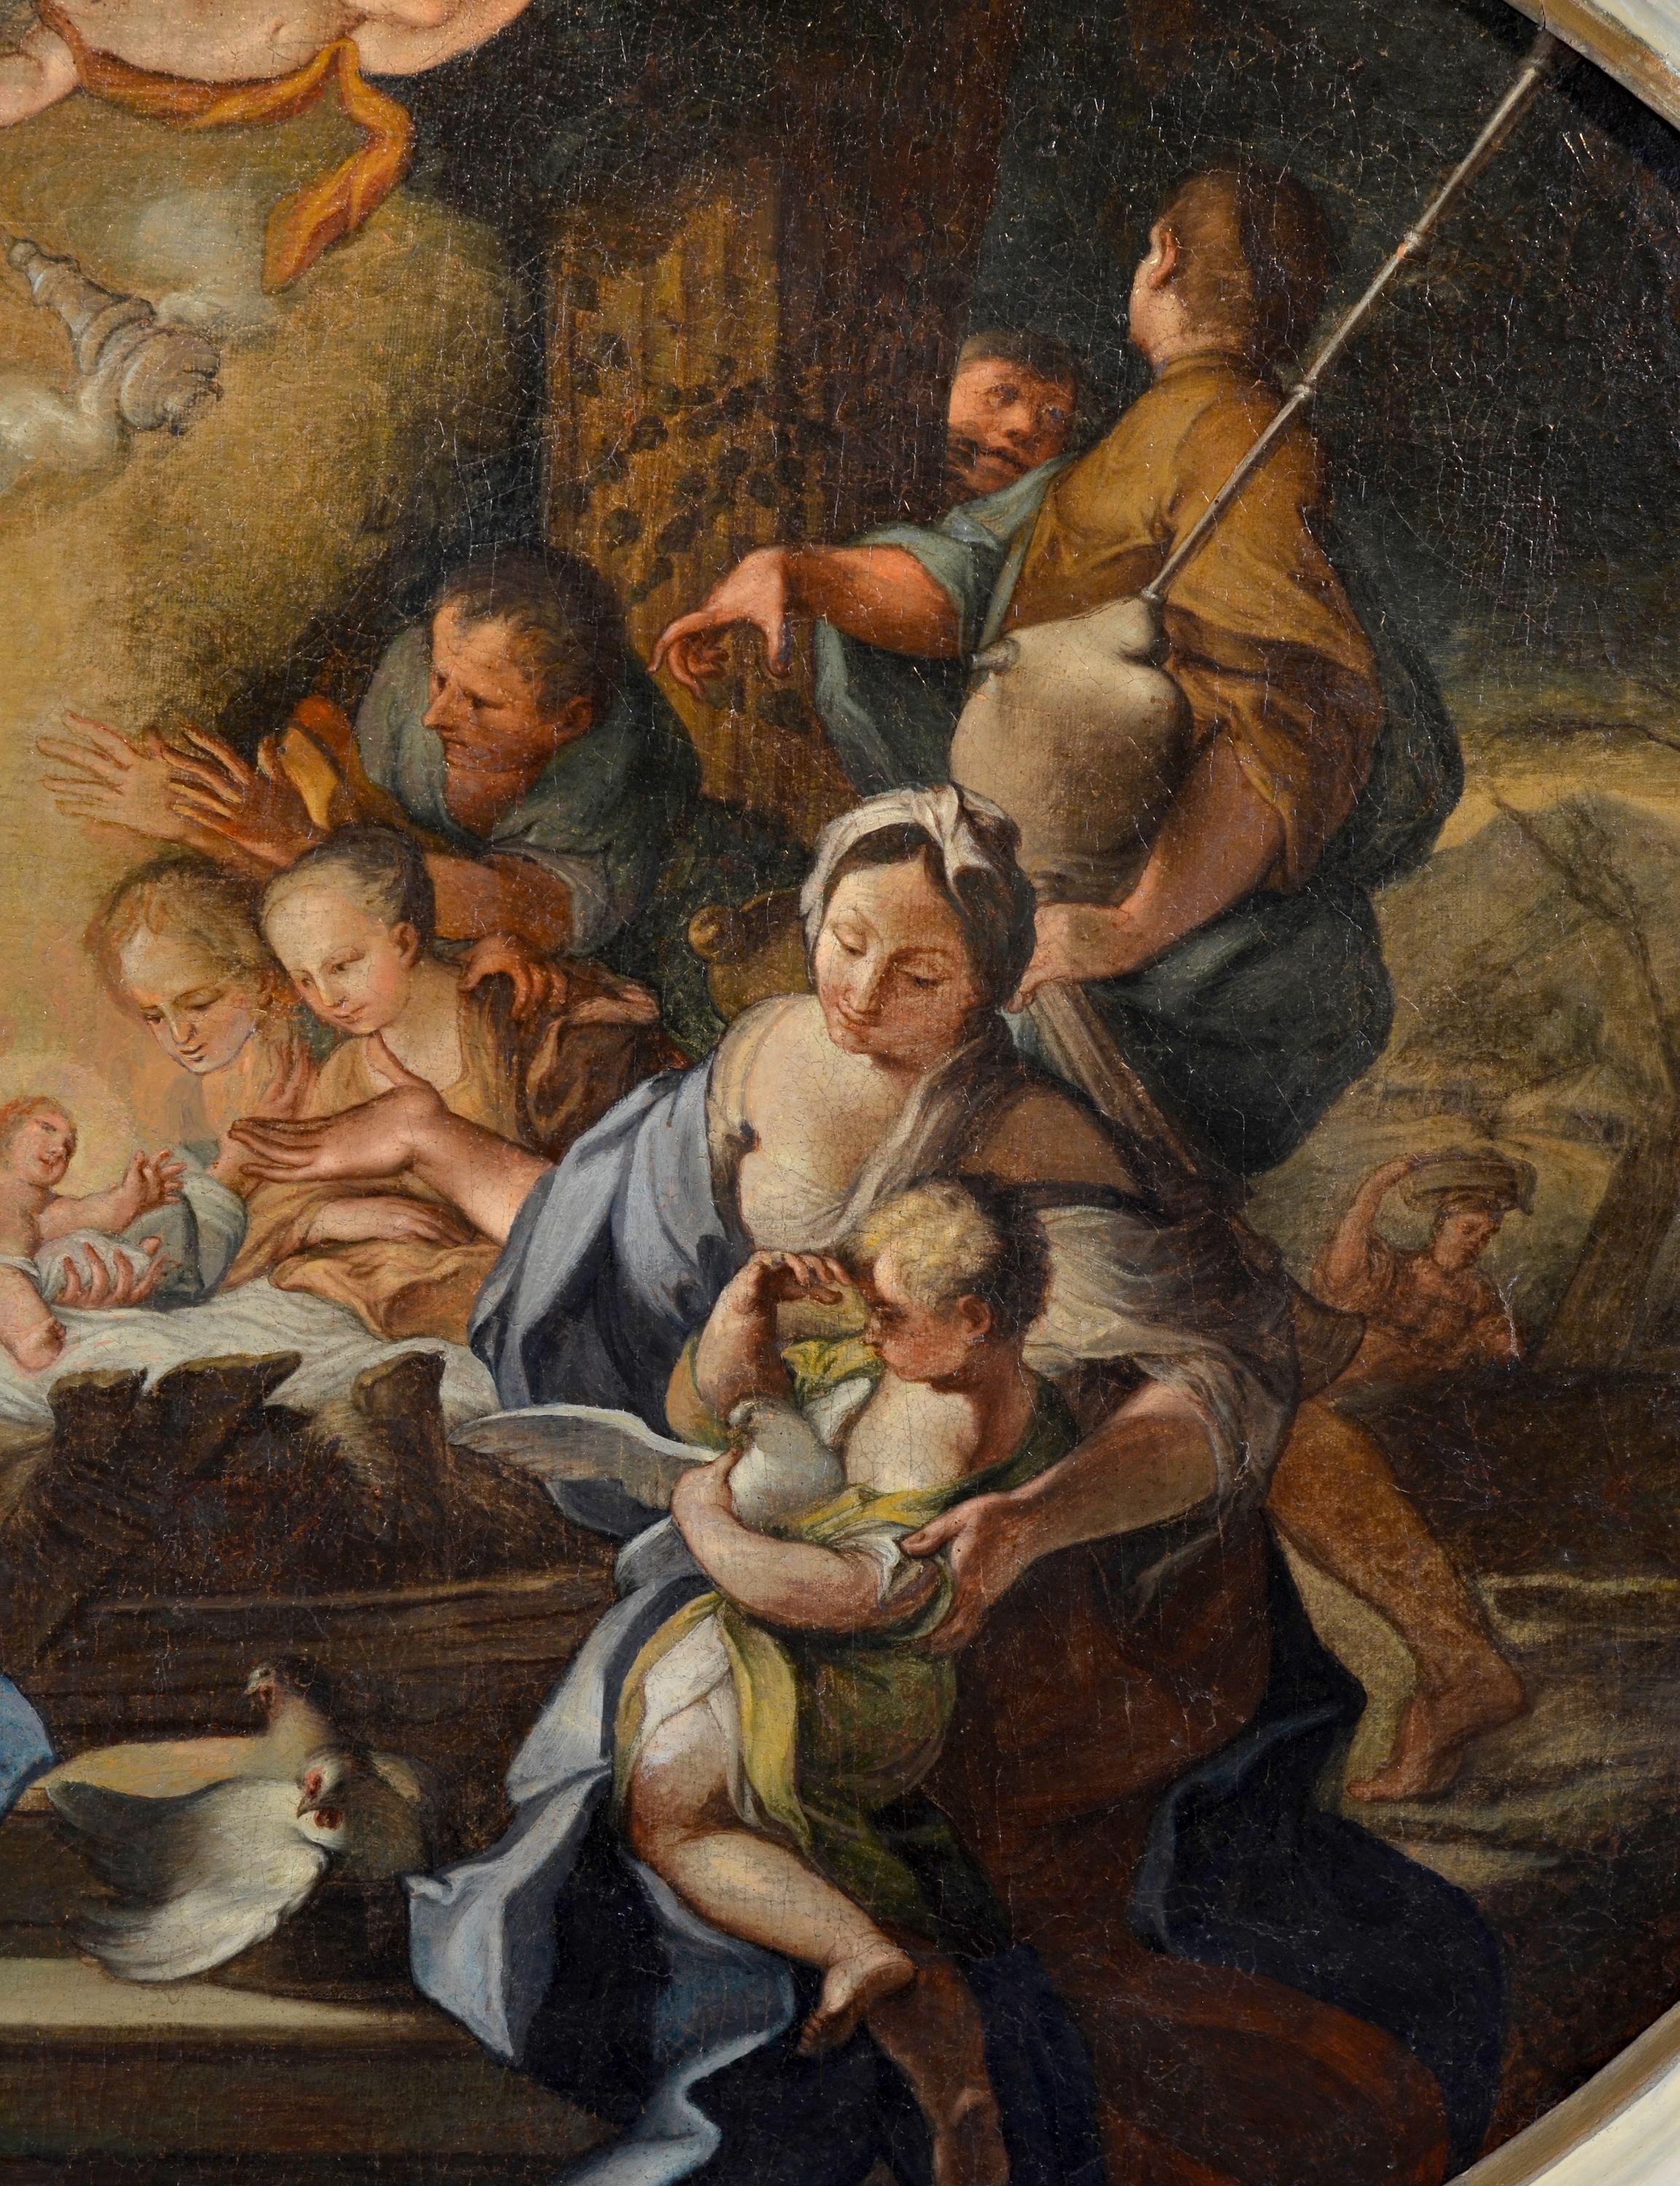 (After) Sebastiano Conca (Gaeta 1680 - Naples 1764) 
The Adoration of the Shepherds

oil on canvas, (cm): 122 x 100,
framed

The proposed table, datable in the first decades of the eighteenth century, is a reissue of a painting by Sebastiano Conca